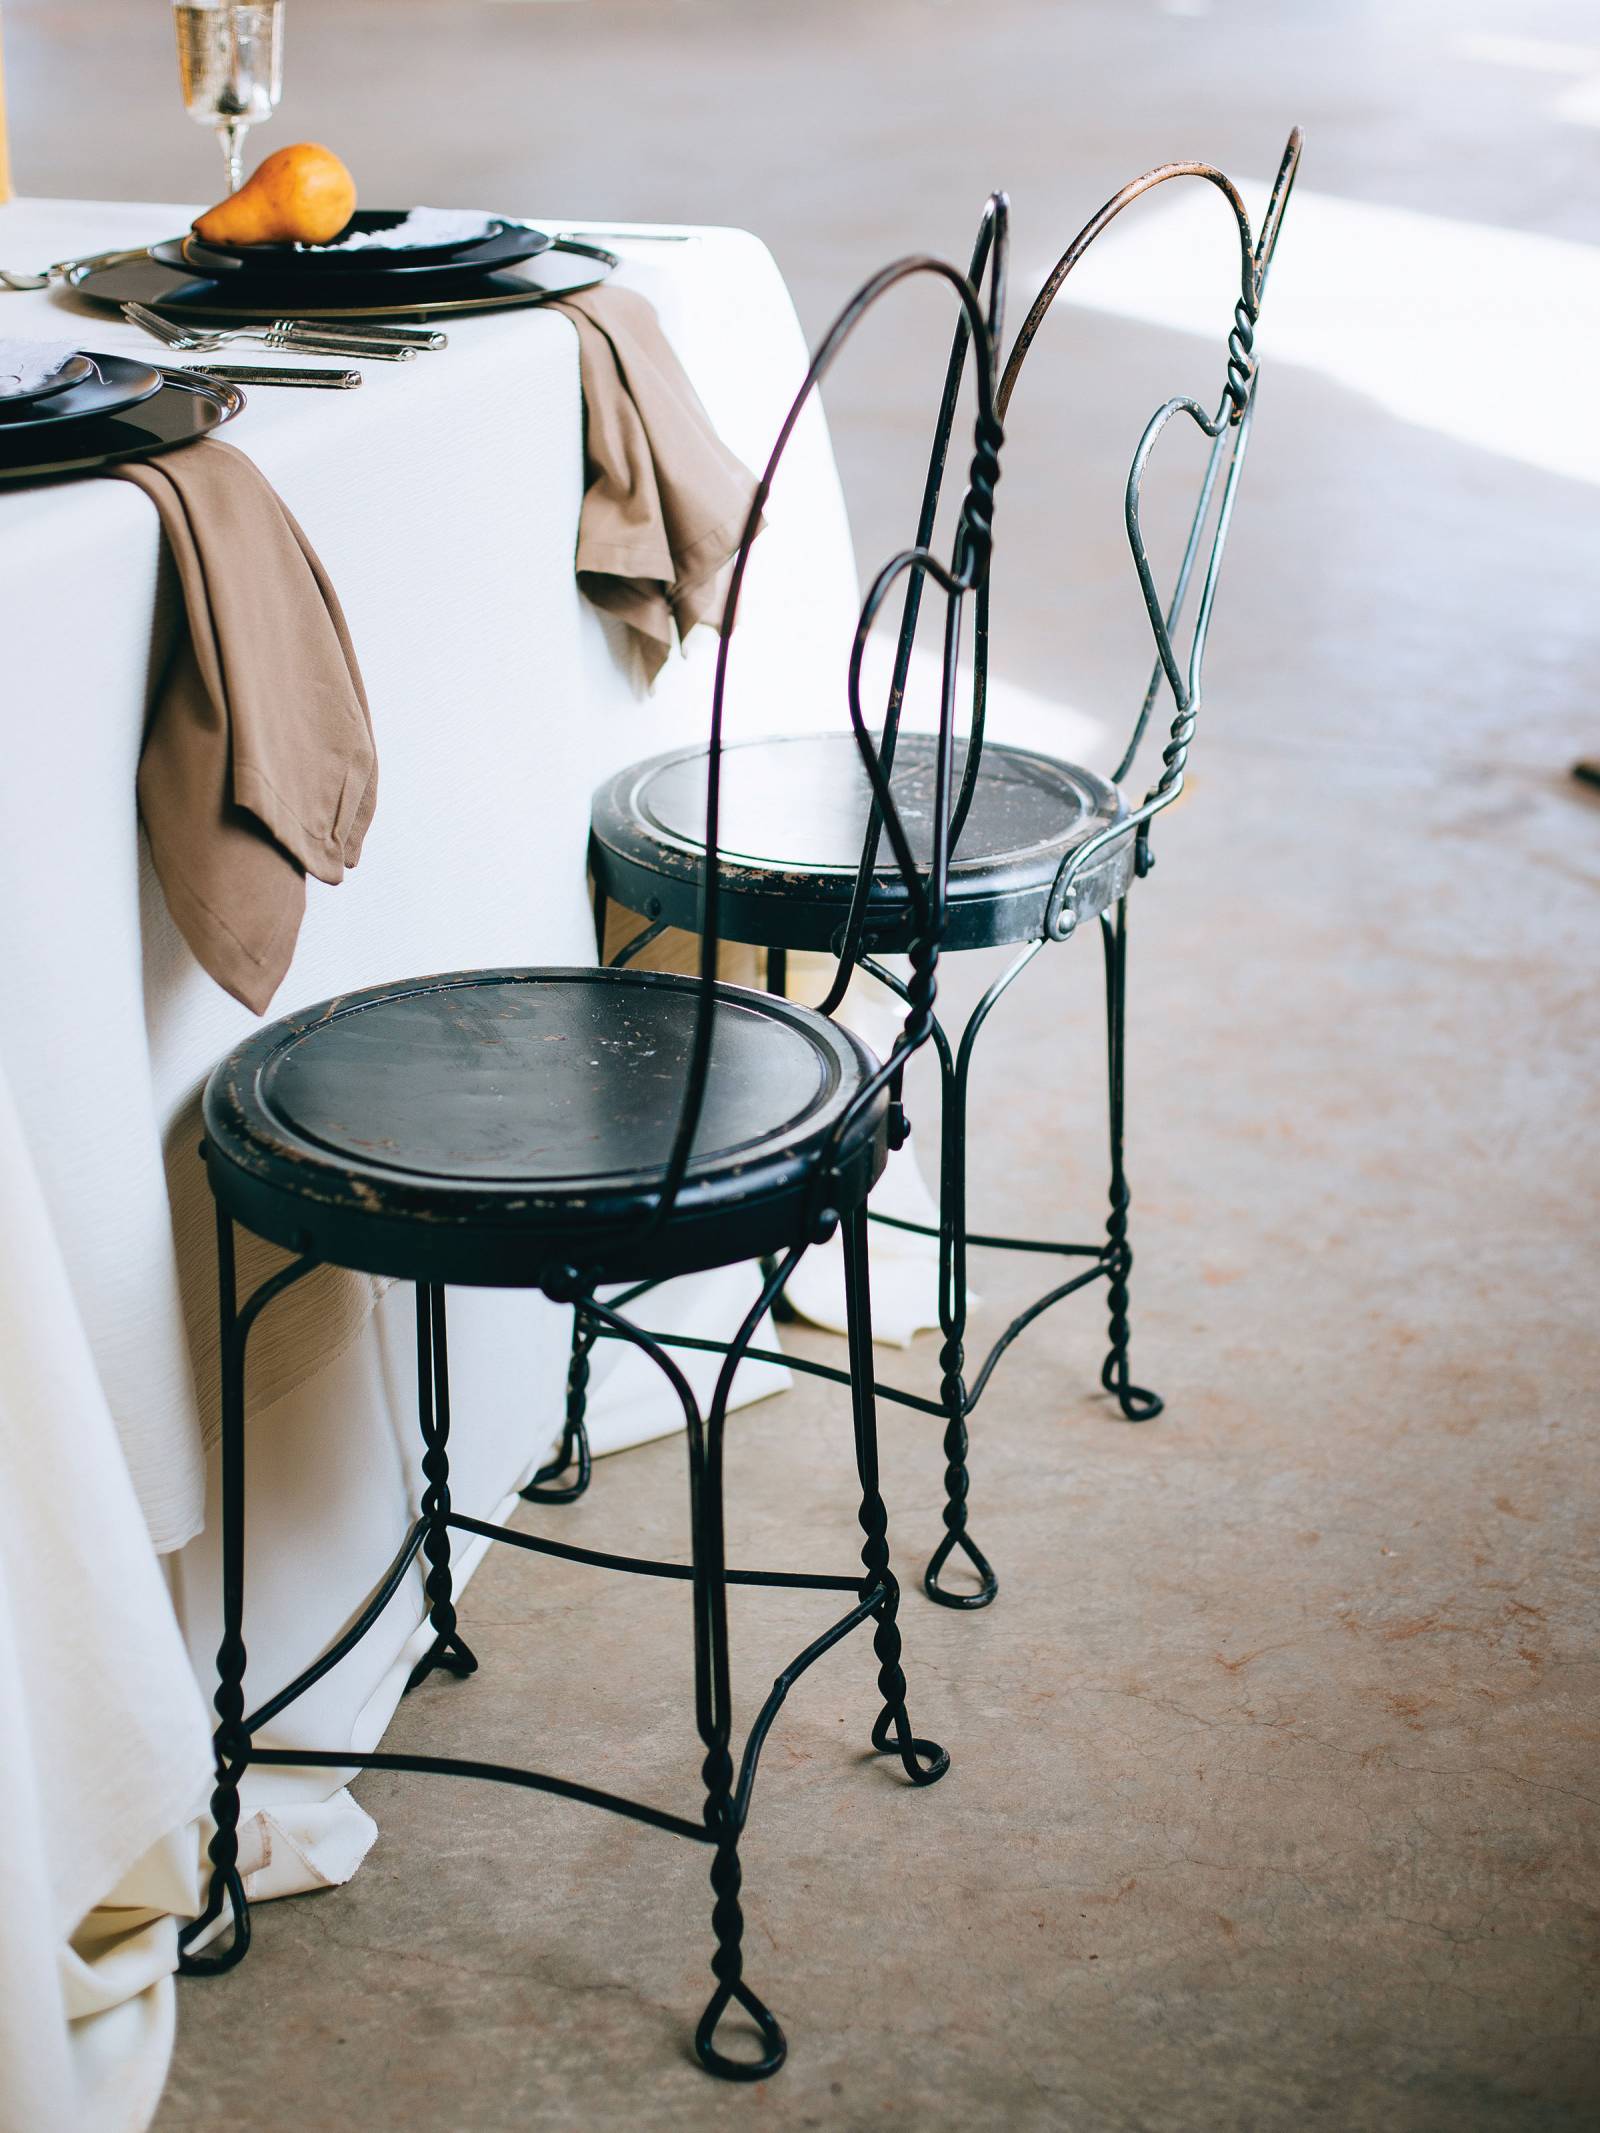 Black bistro chairs by a table draped in white linen with beige napkins and black plates